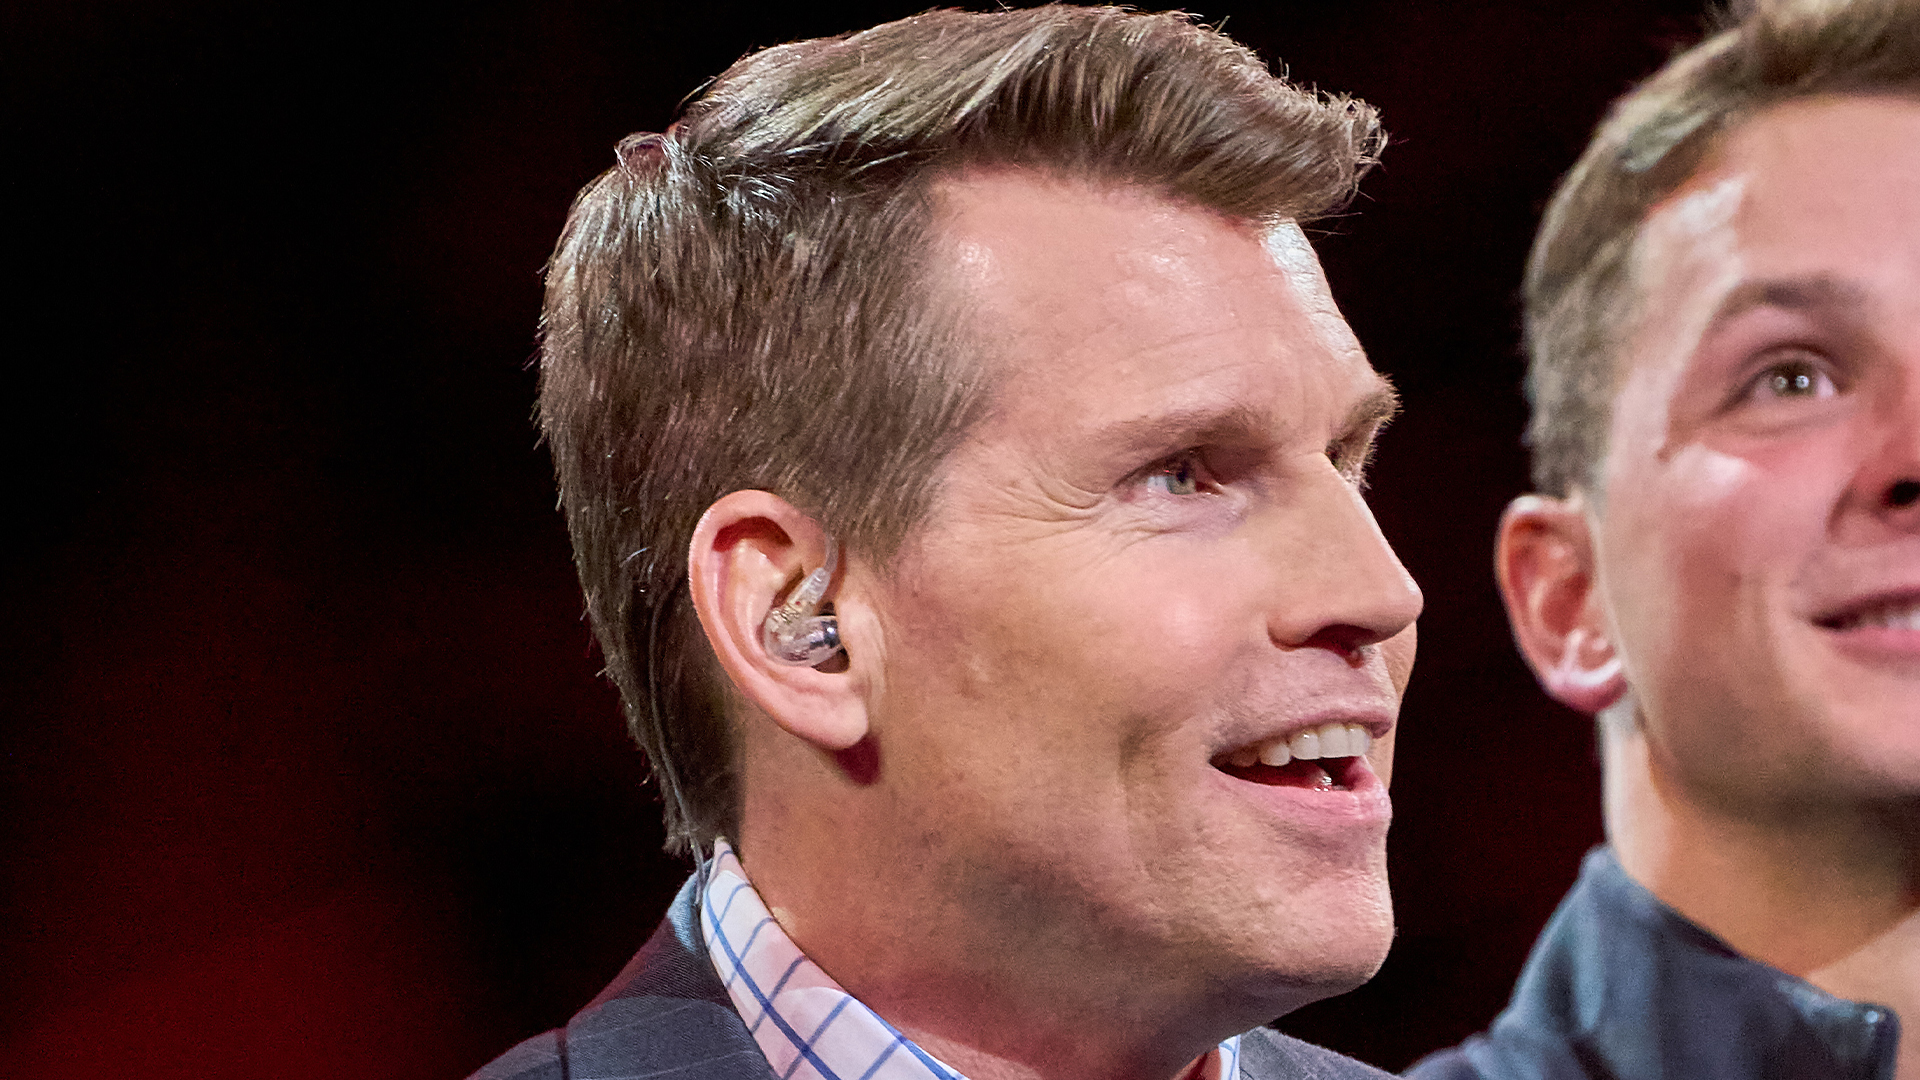 NFL RedZone legend Scott Hanson shakes up major broadcasting event with NBC Sports in epic sports coverage partnership!